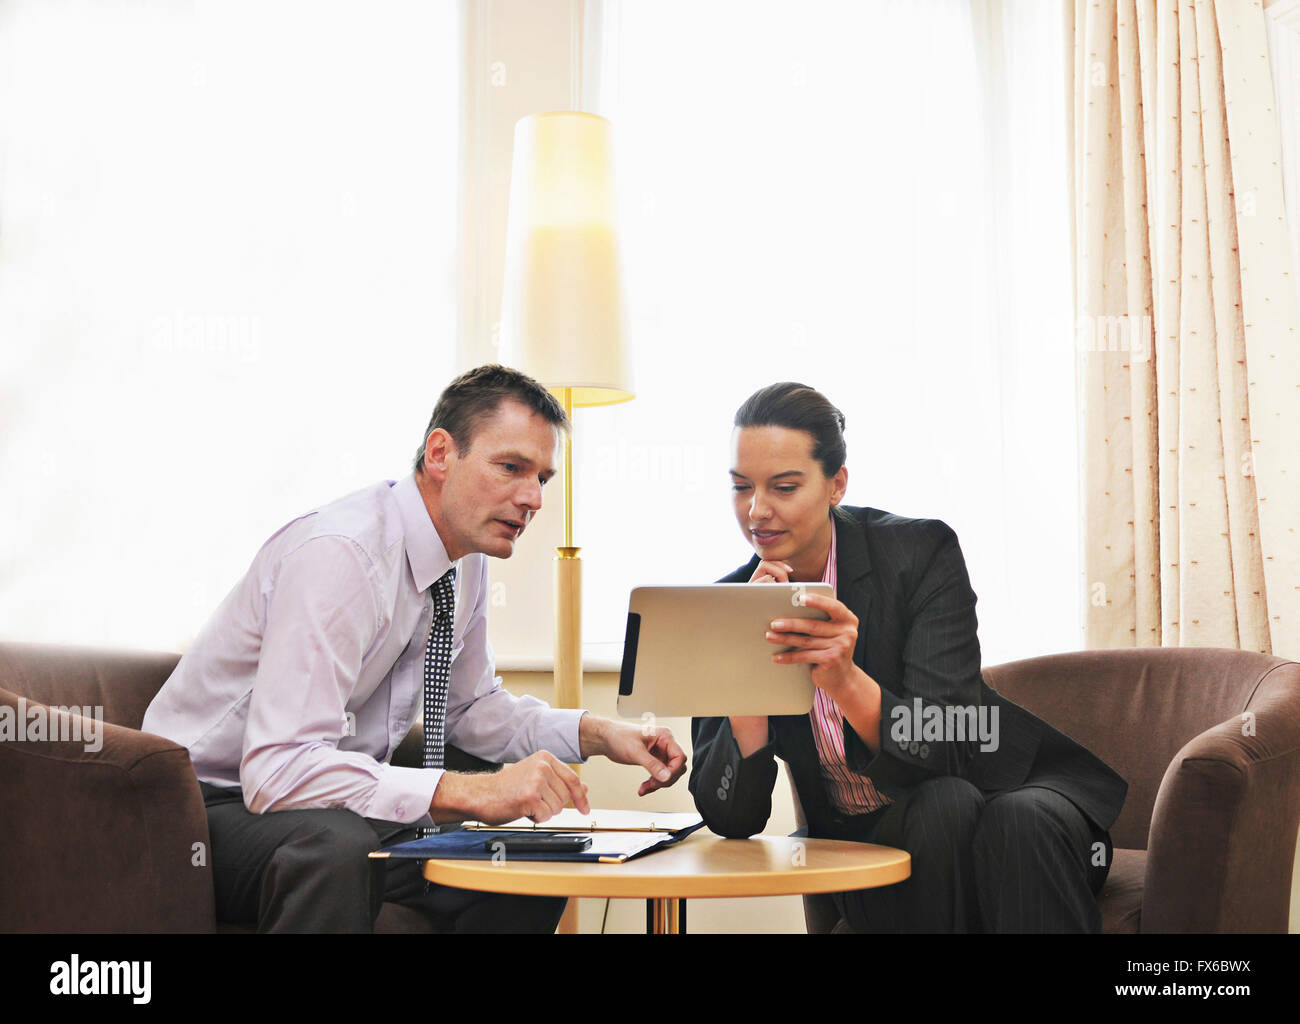 Caucasian business people using digital tablet in lounge Stock Photo